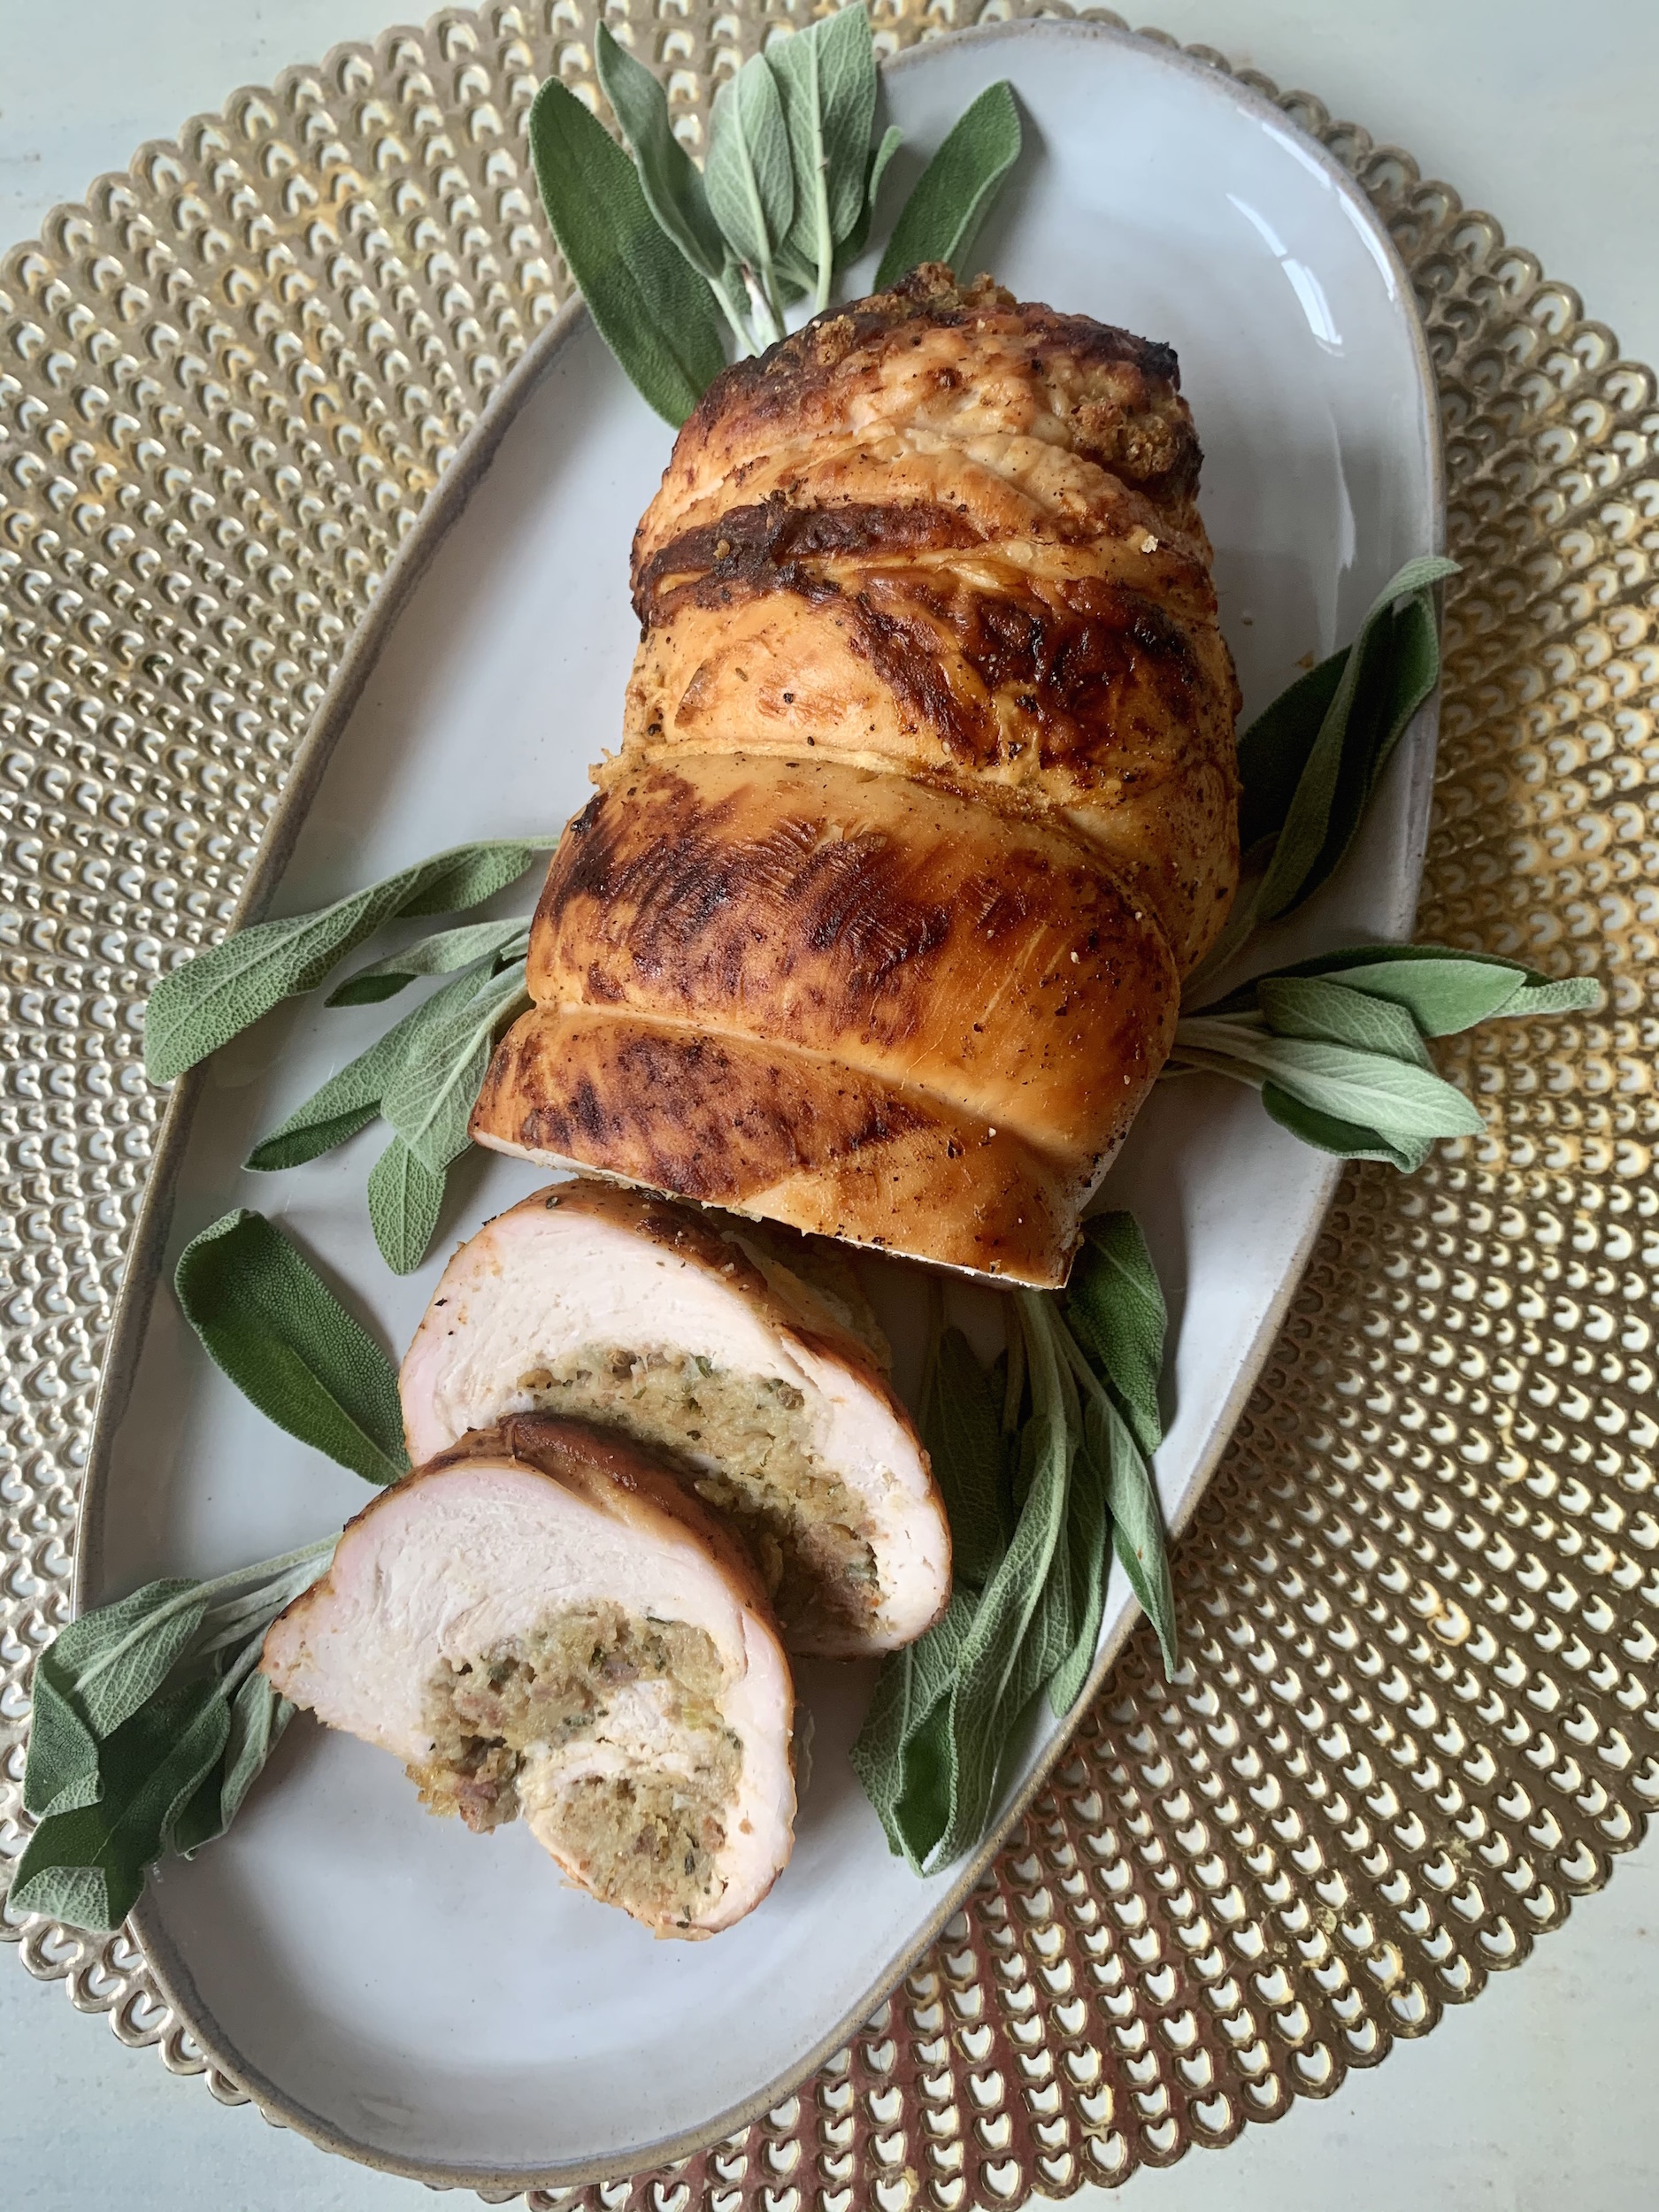 Gold placemat with grey platter of turkey roulade with stuffing and fresh sage leaves for garnish